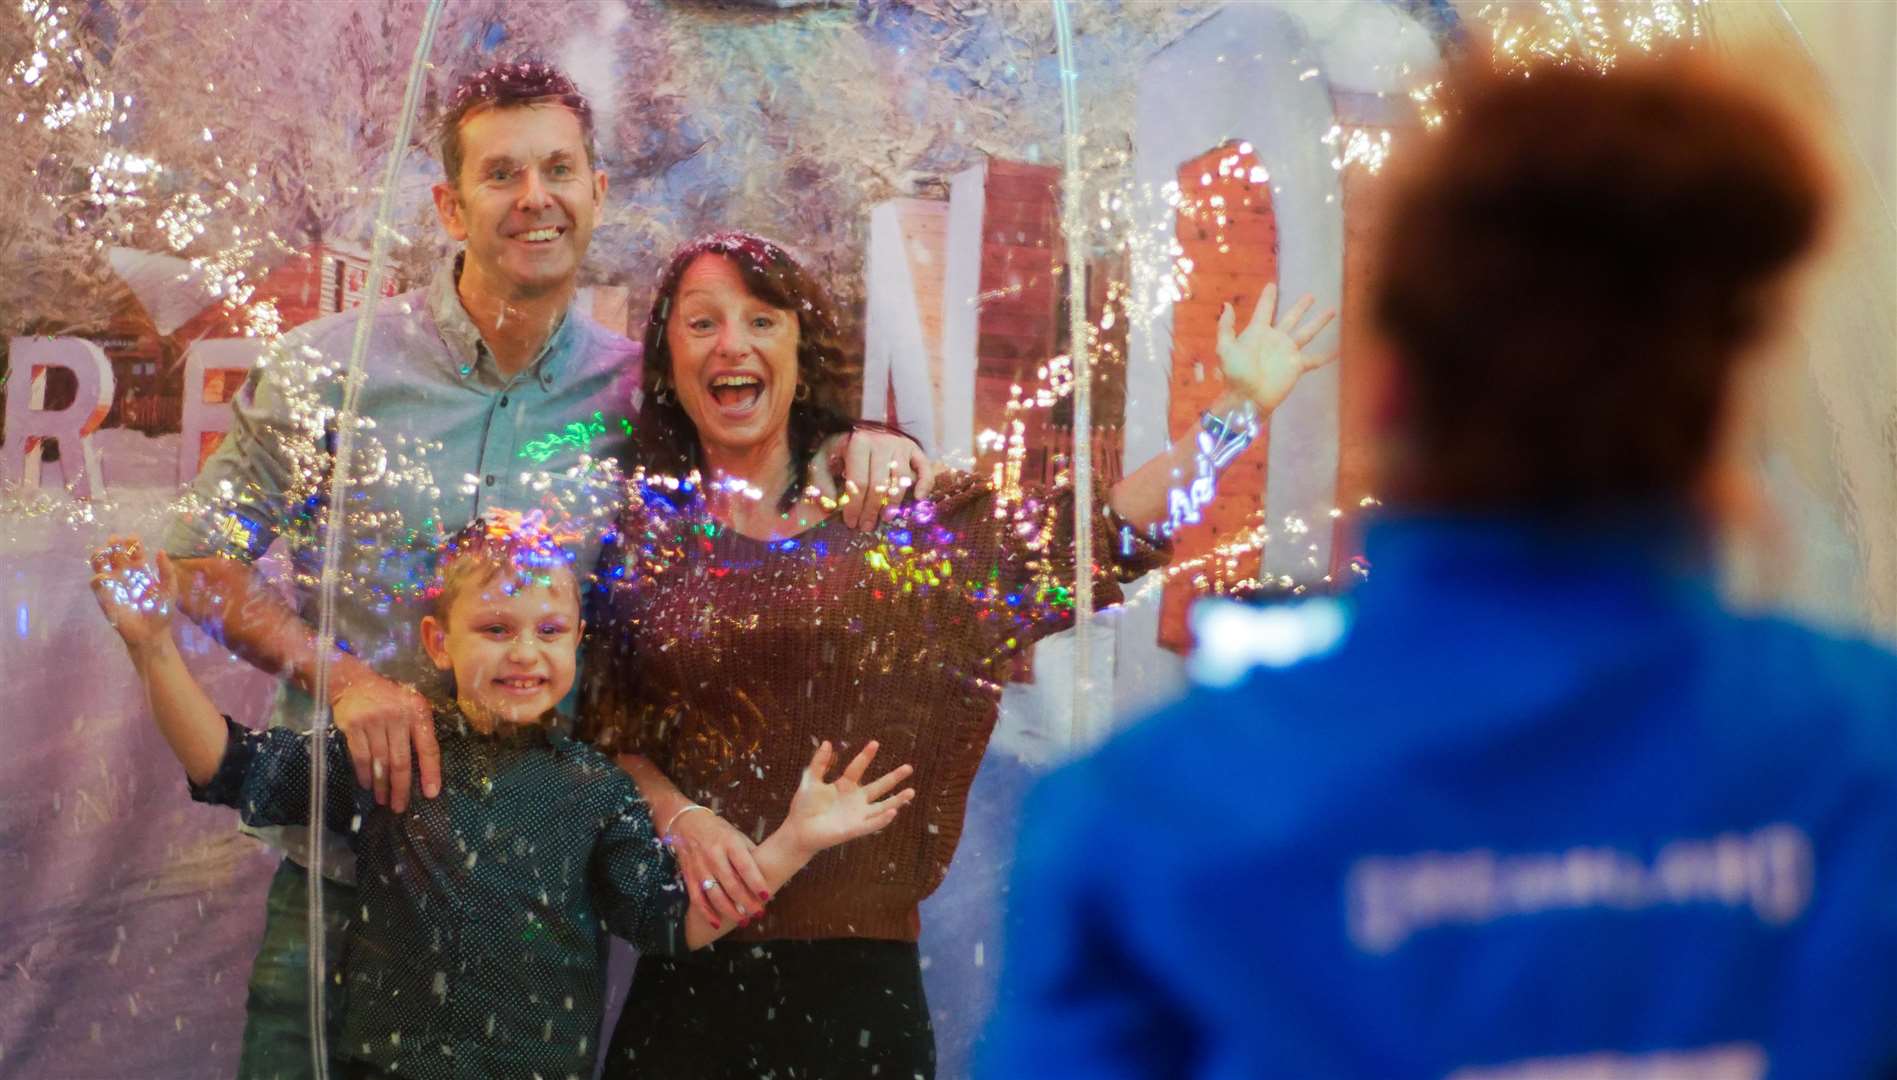 There's still time to take a seasonal selfie in the the giant snow globe in Dreamland